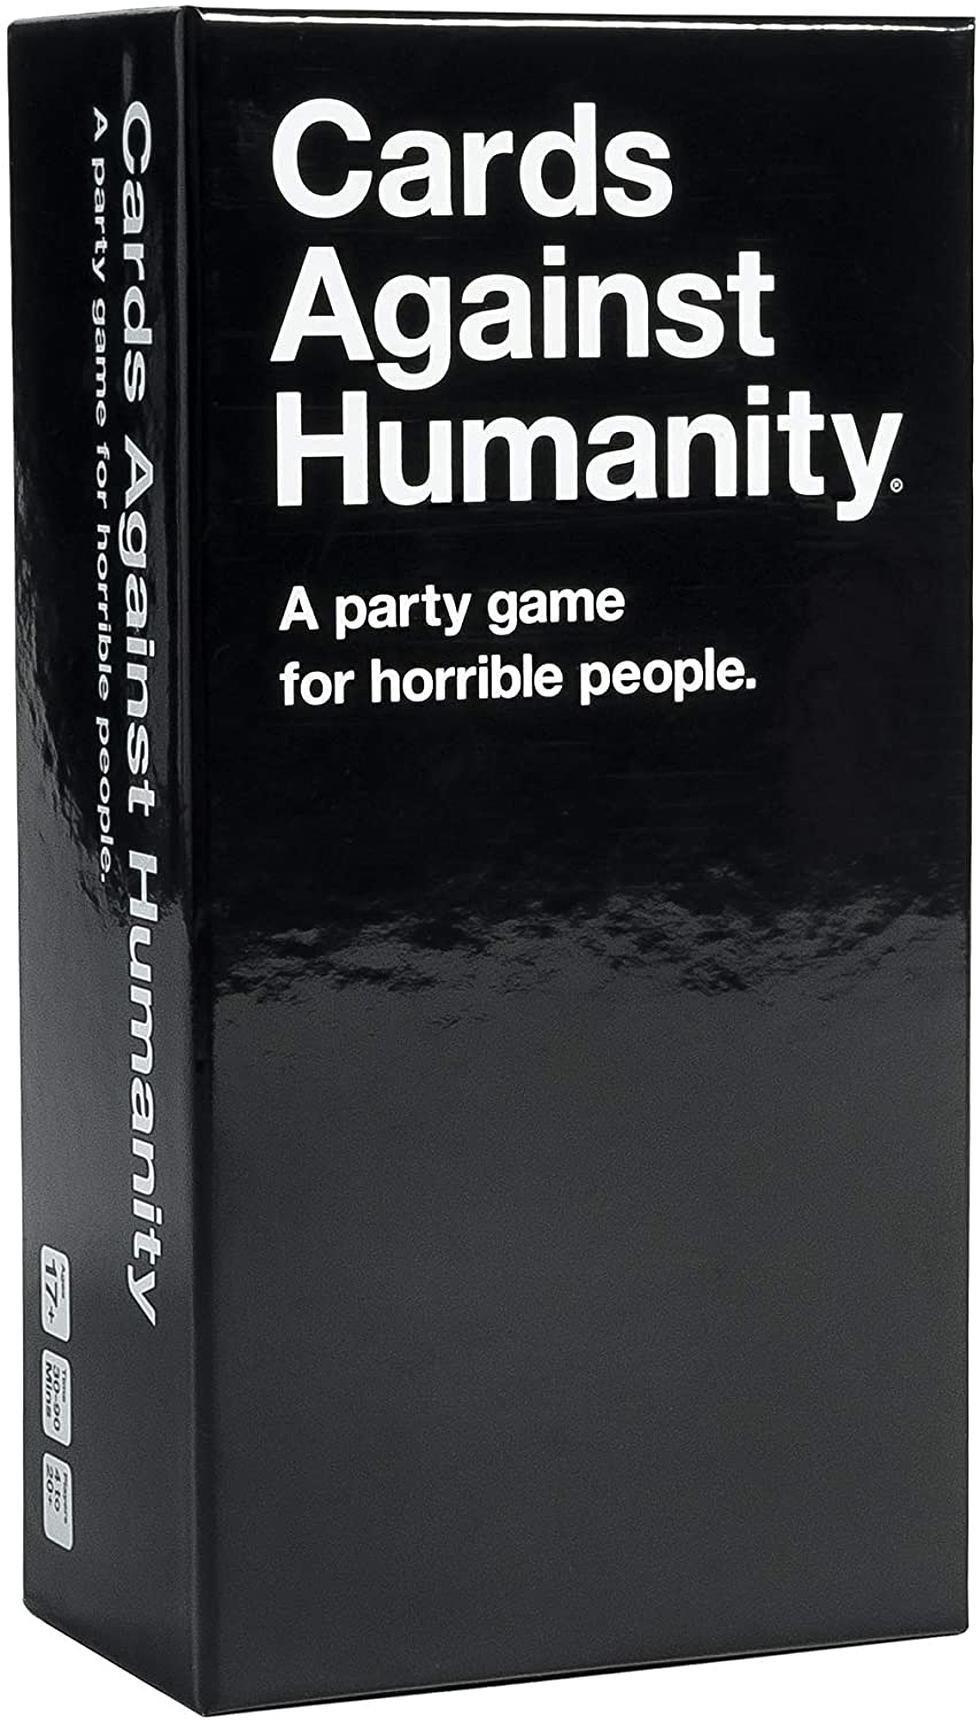 You Can Play Cards Against Humanity For Free W/ Friends Online